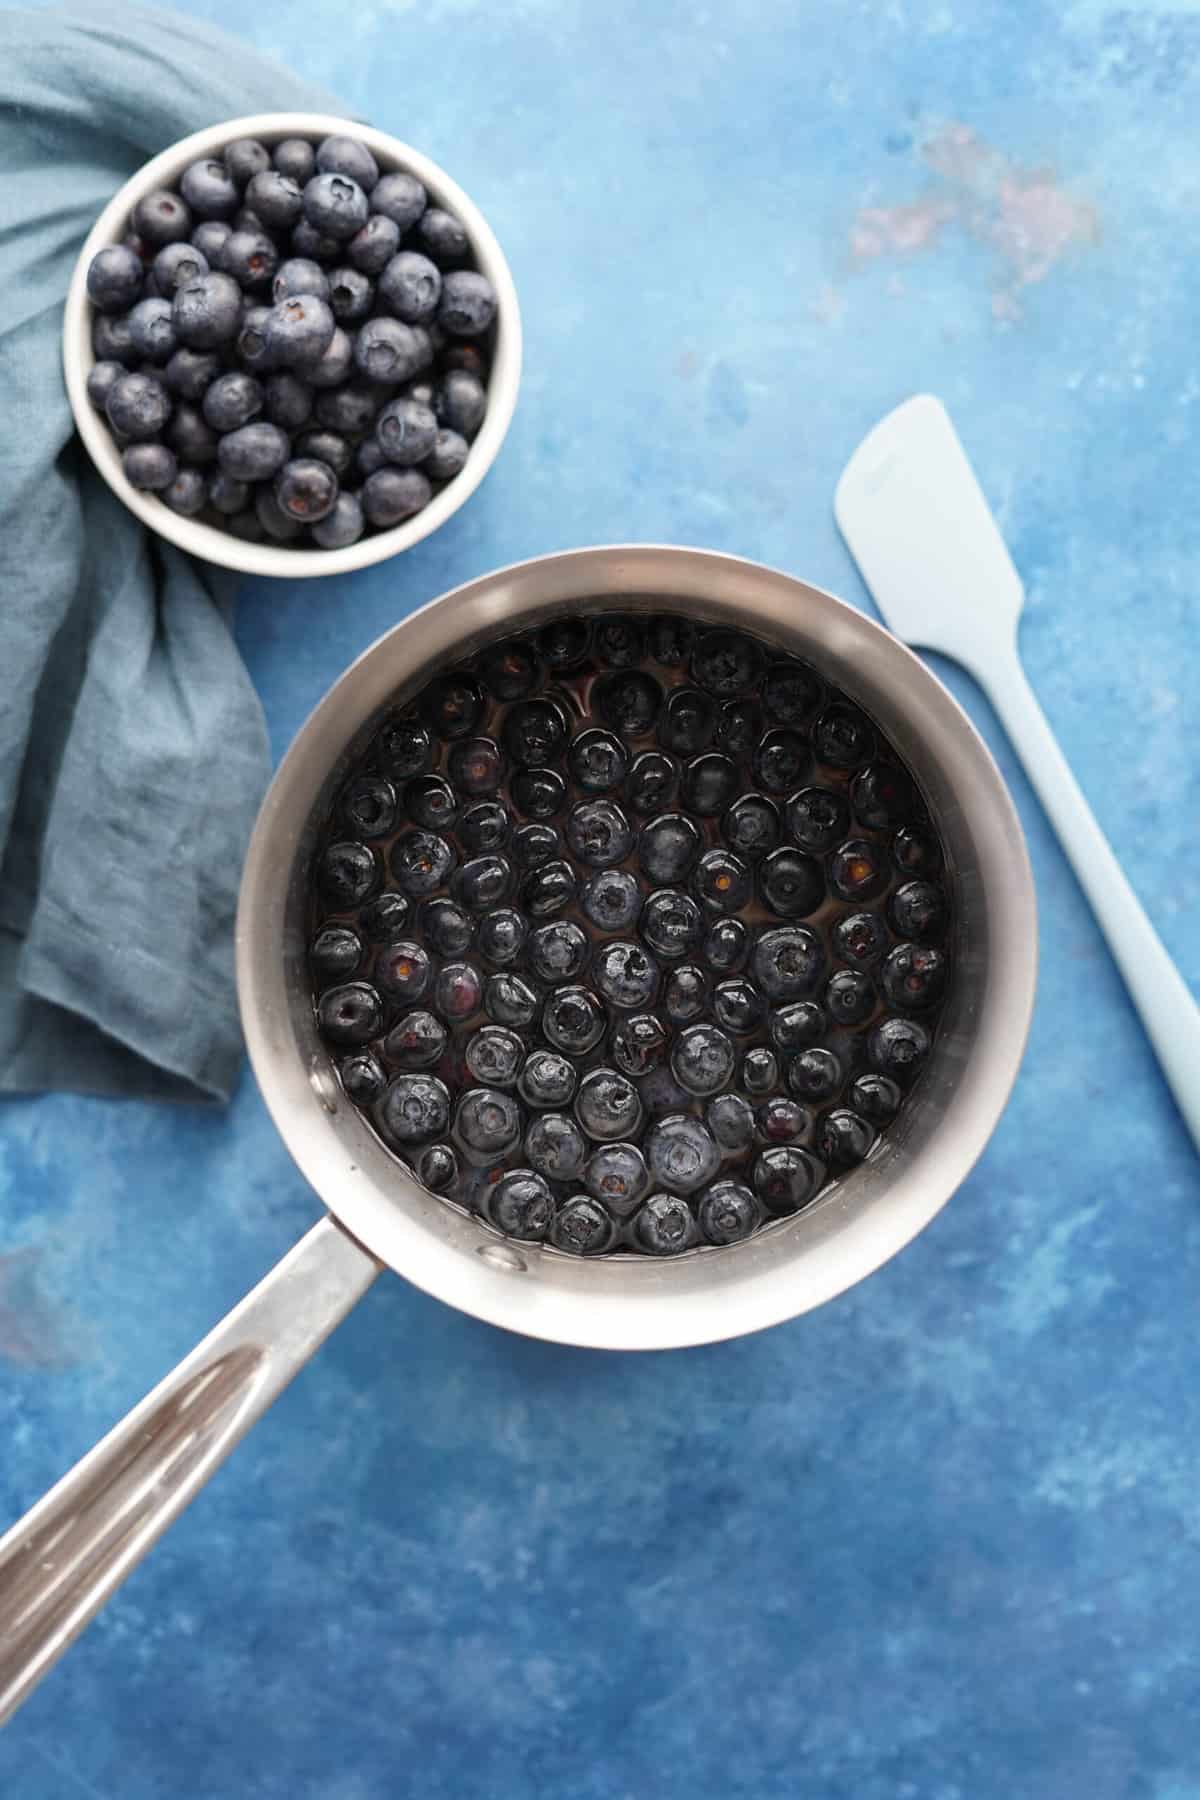 Step 2 for making blueberry simple syrup, simmer blueberries and lemon juice over medium heat to infuse the blueberry flavor in the syrup.